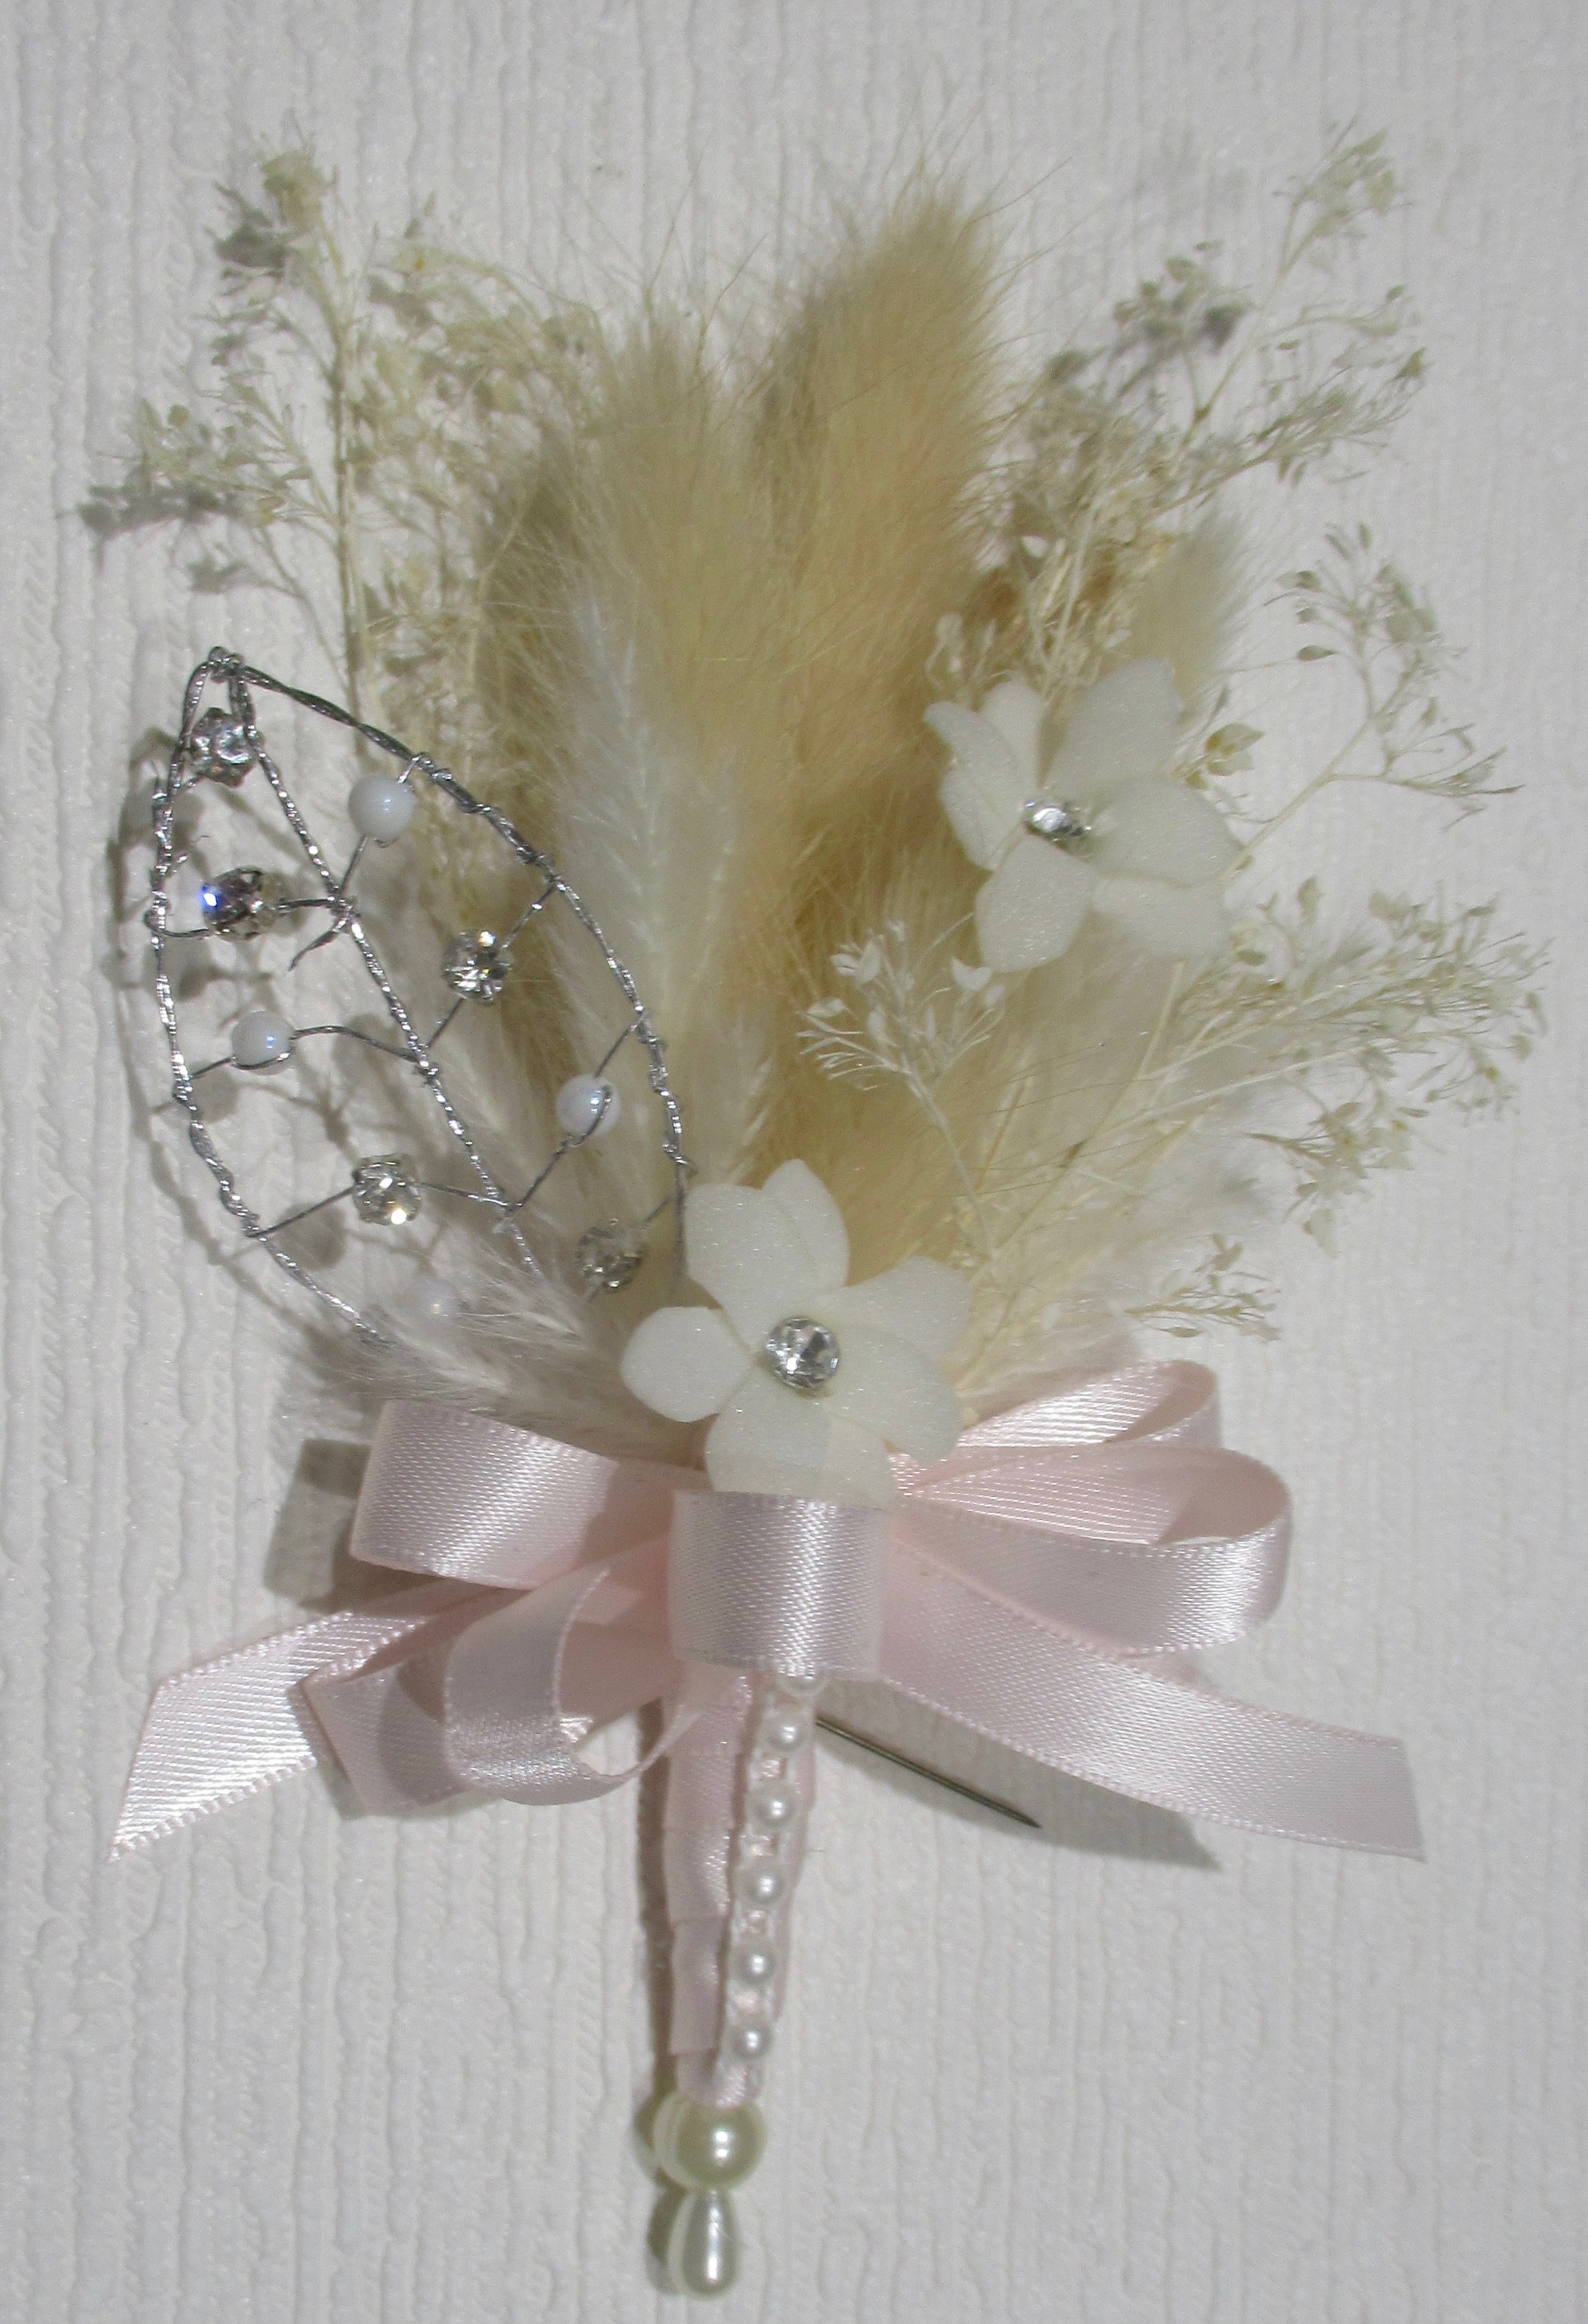 Dried Flower Corsage, Blush & Ivory Dried flower corsage for weddings